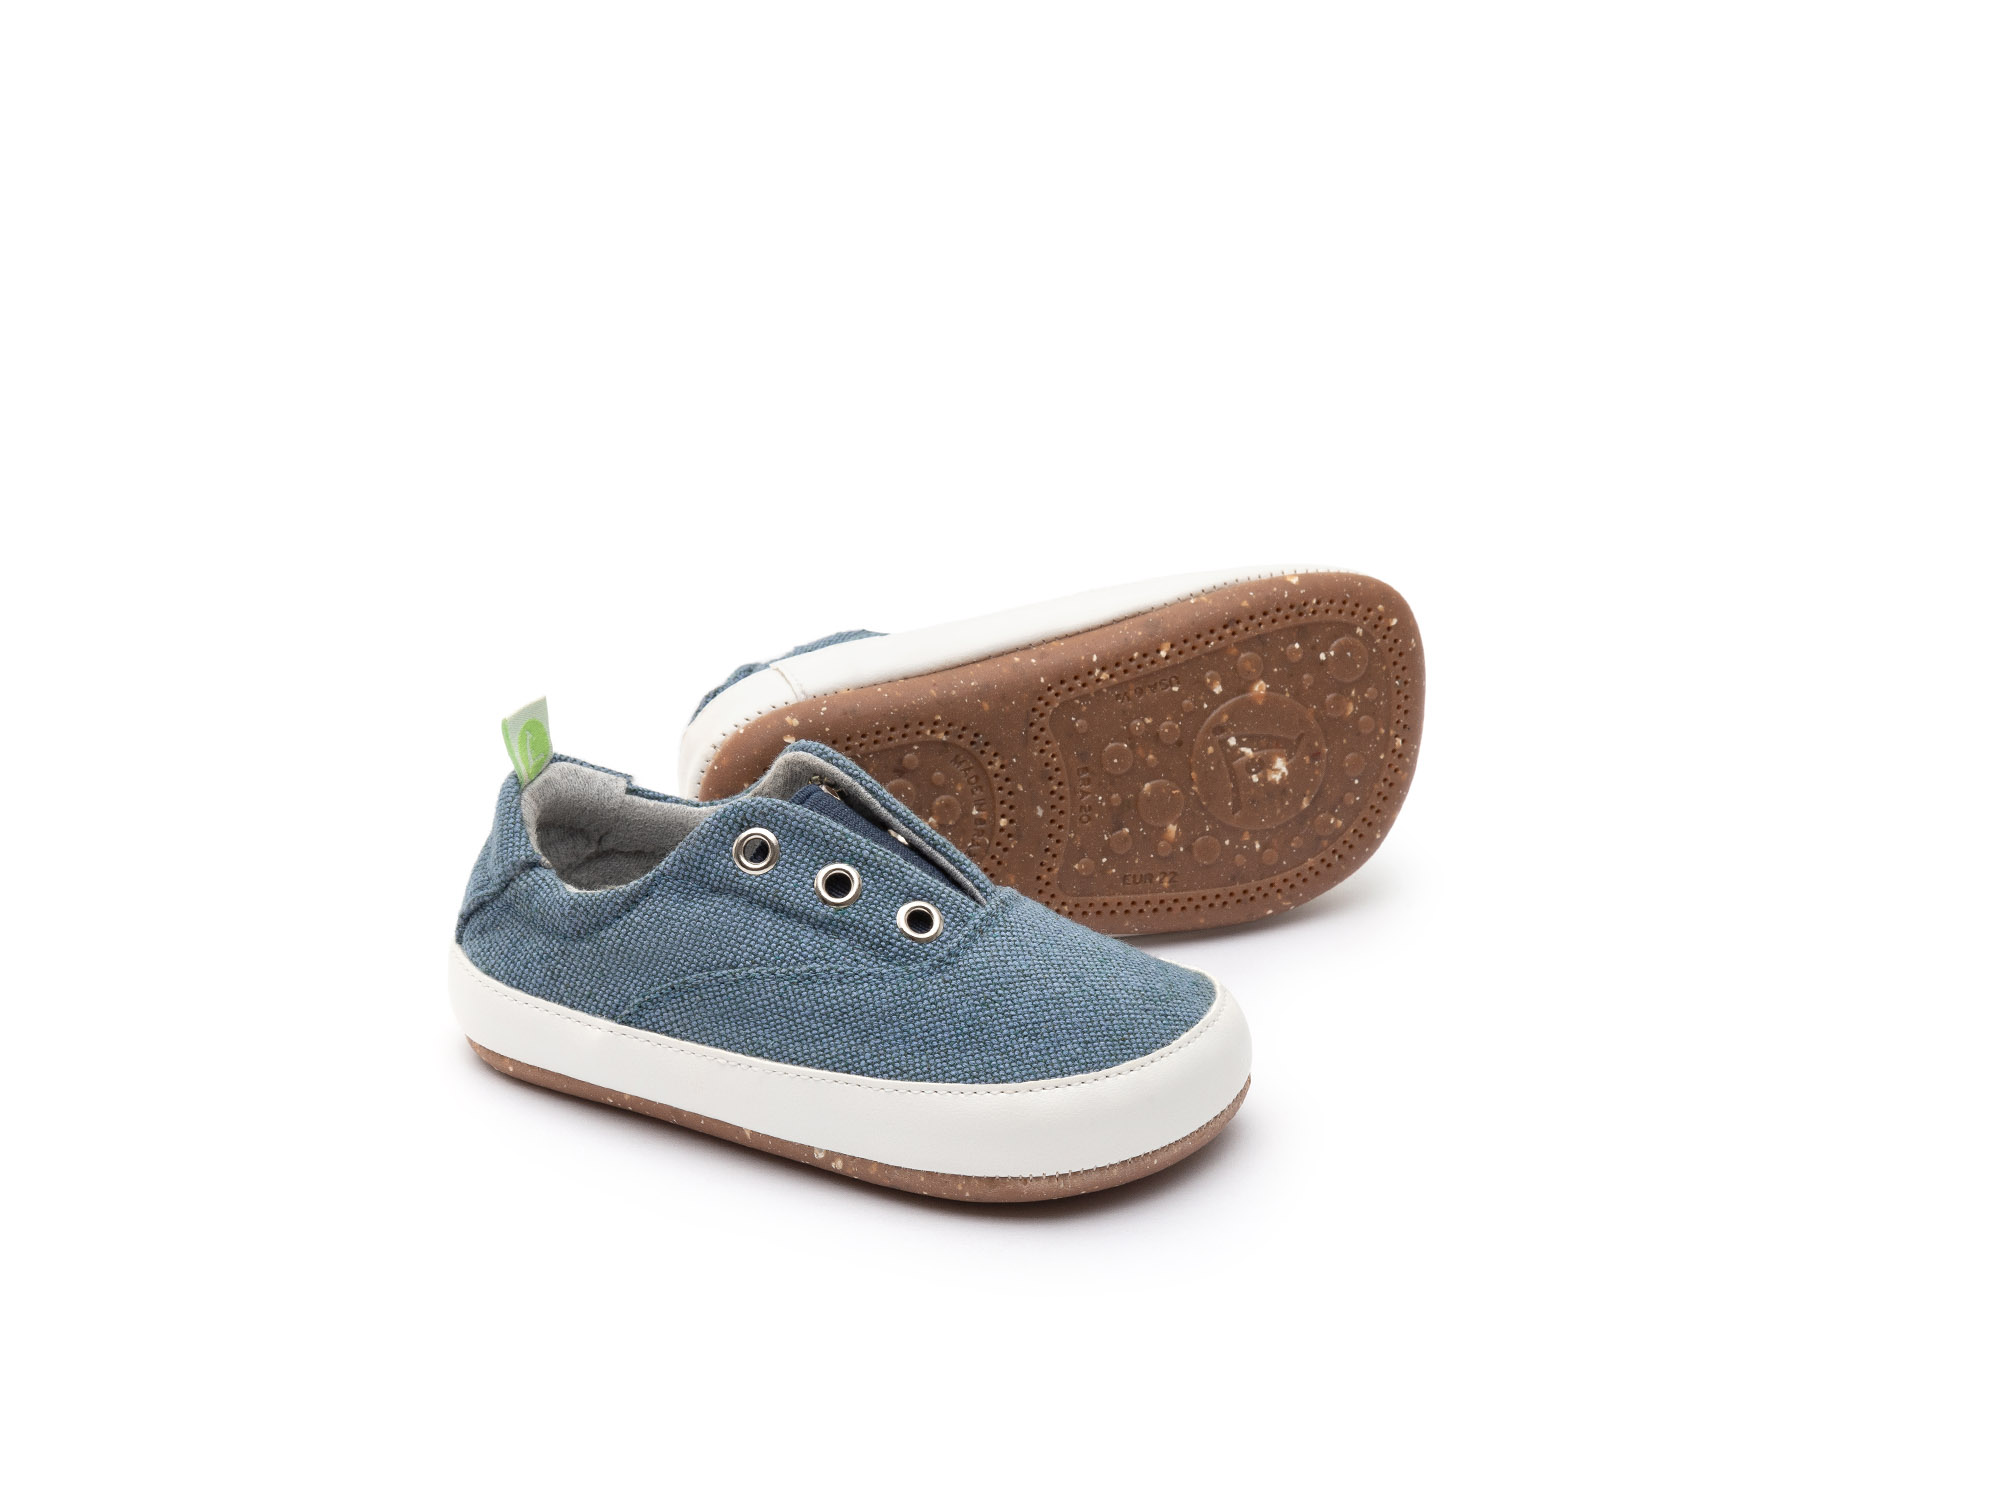 UP & GO Sneakers for Boys Spicey Green | Tip Toey Joey - Australia - 0